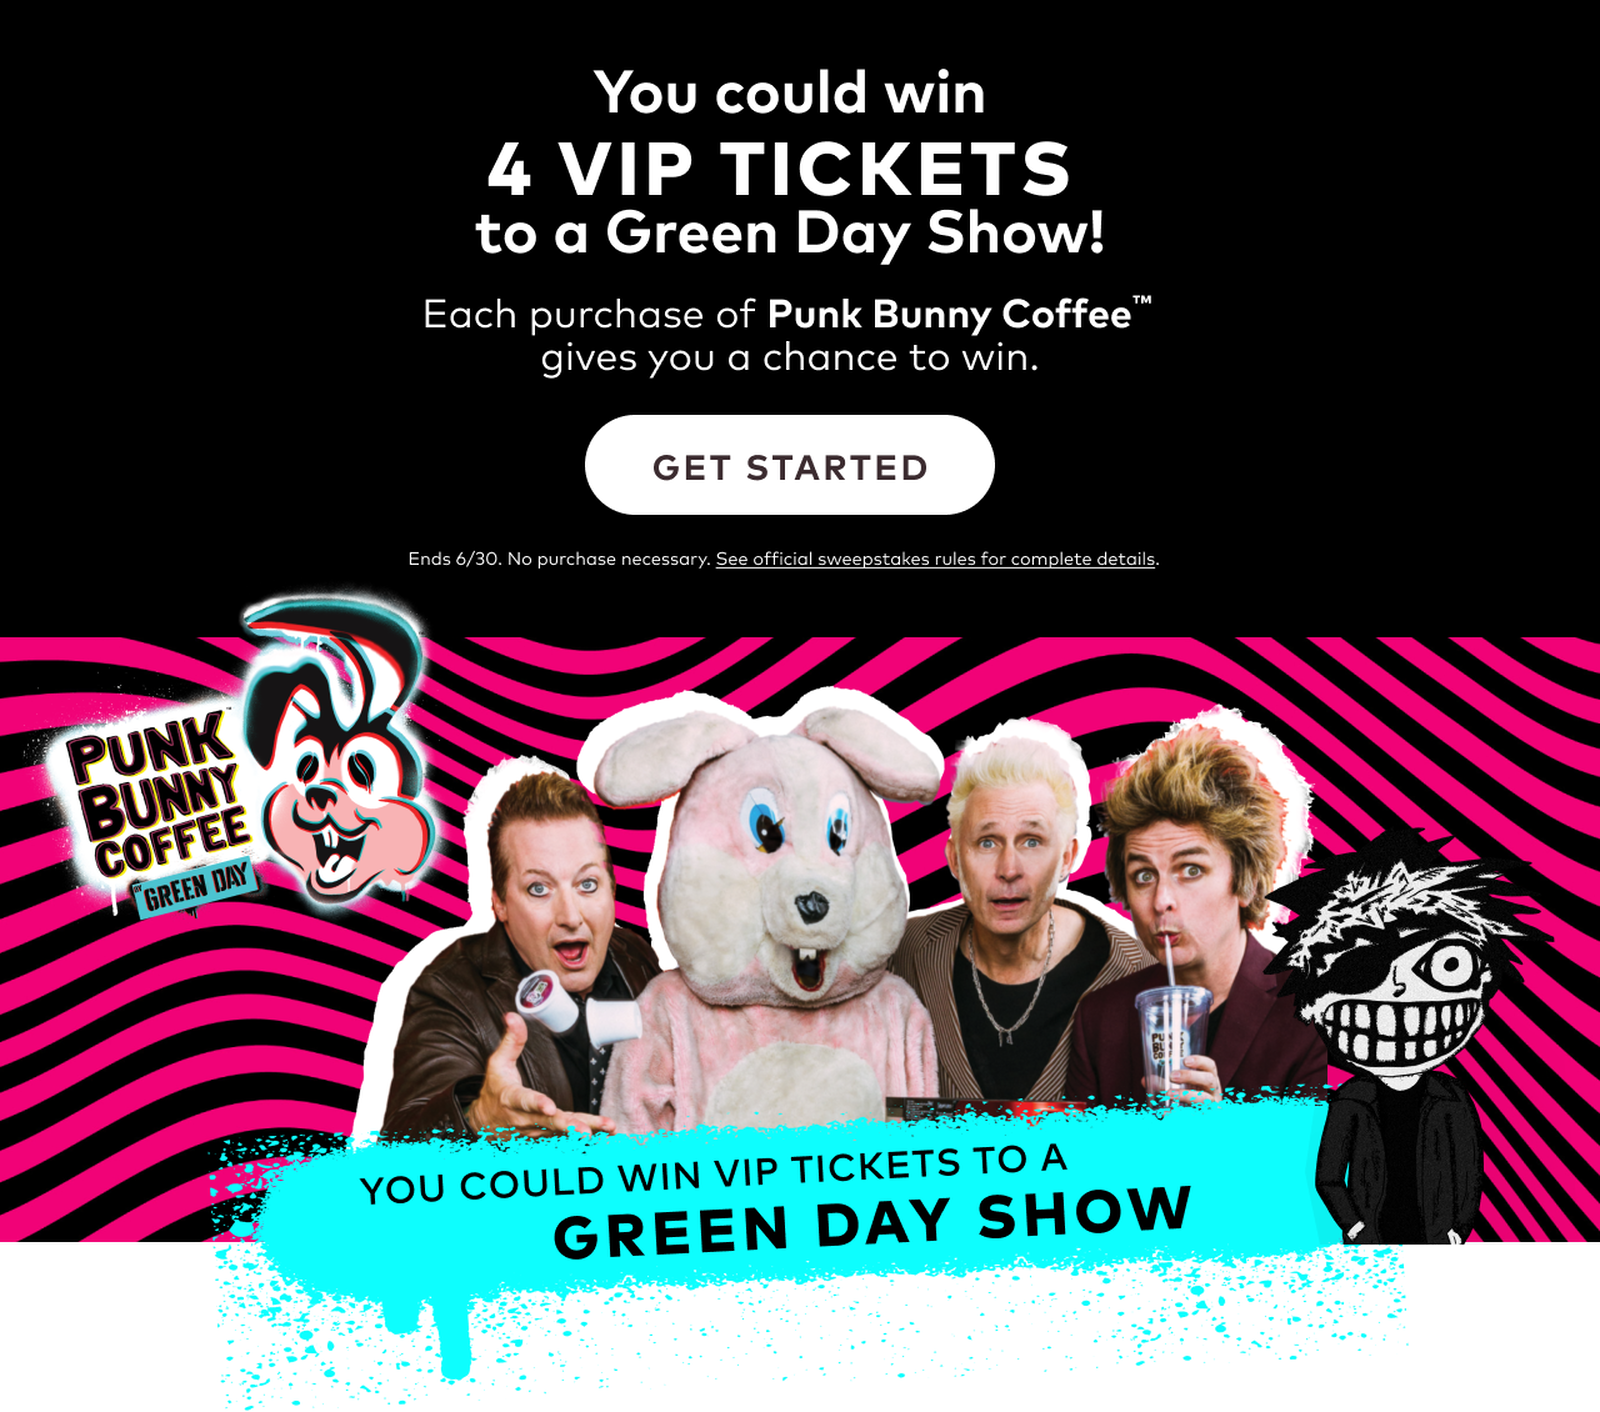 You could win 4 VIP TICKETS to a Green Day Show!